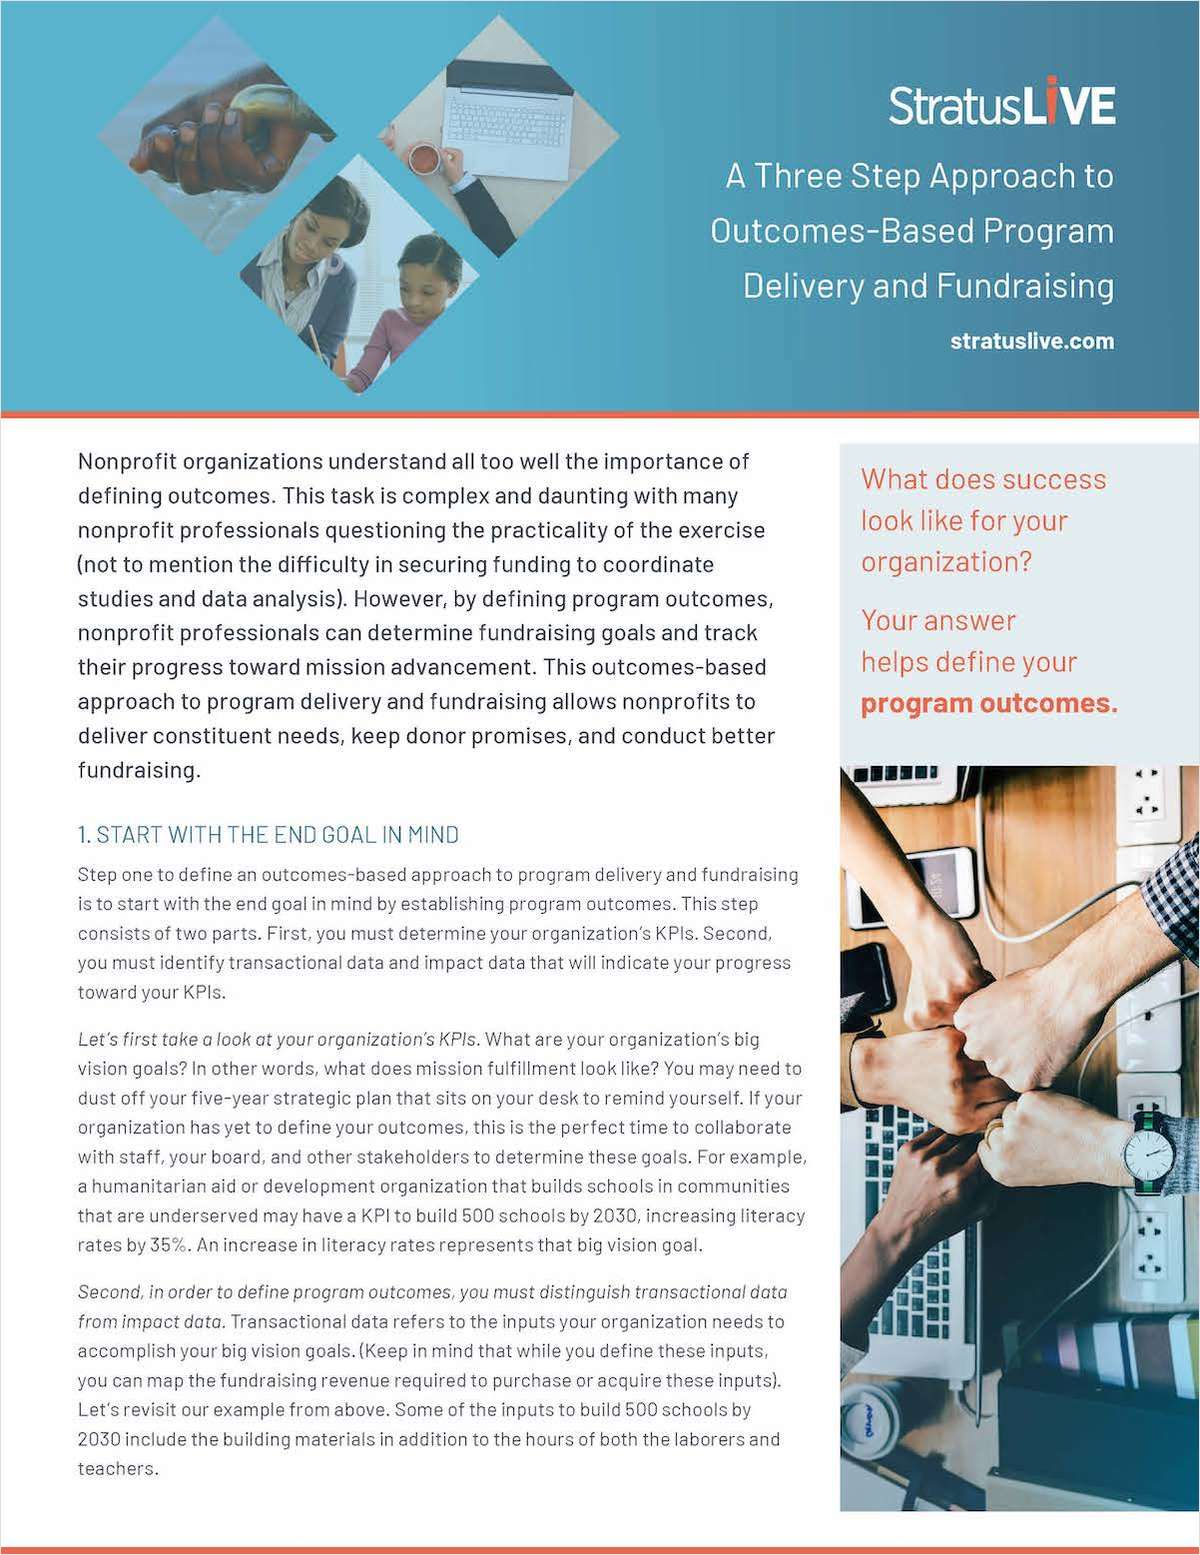 A Three Step Approach to Outcomes-Based Program Delivery and Fundraising